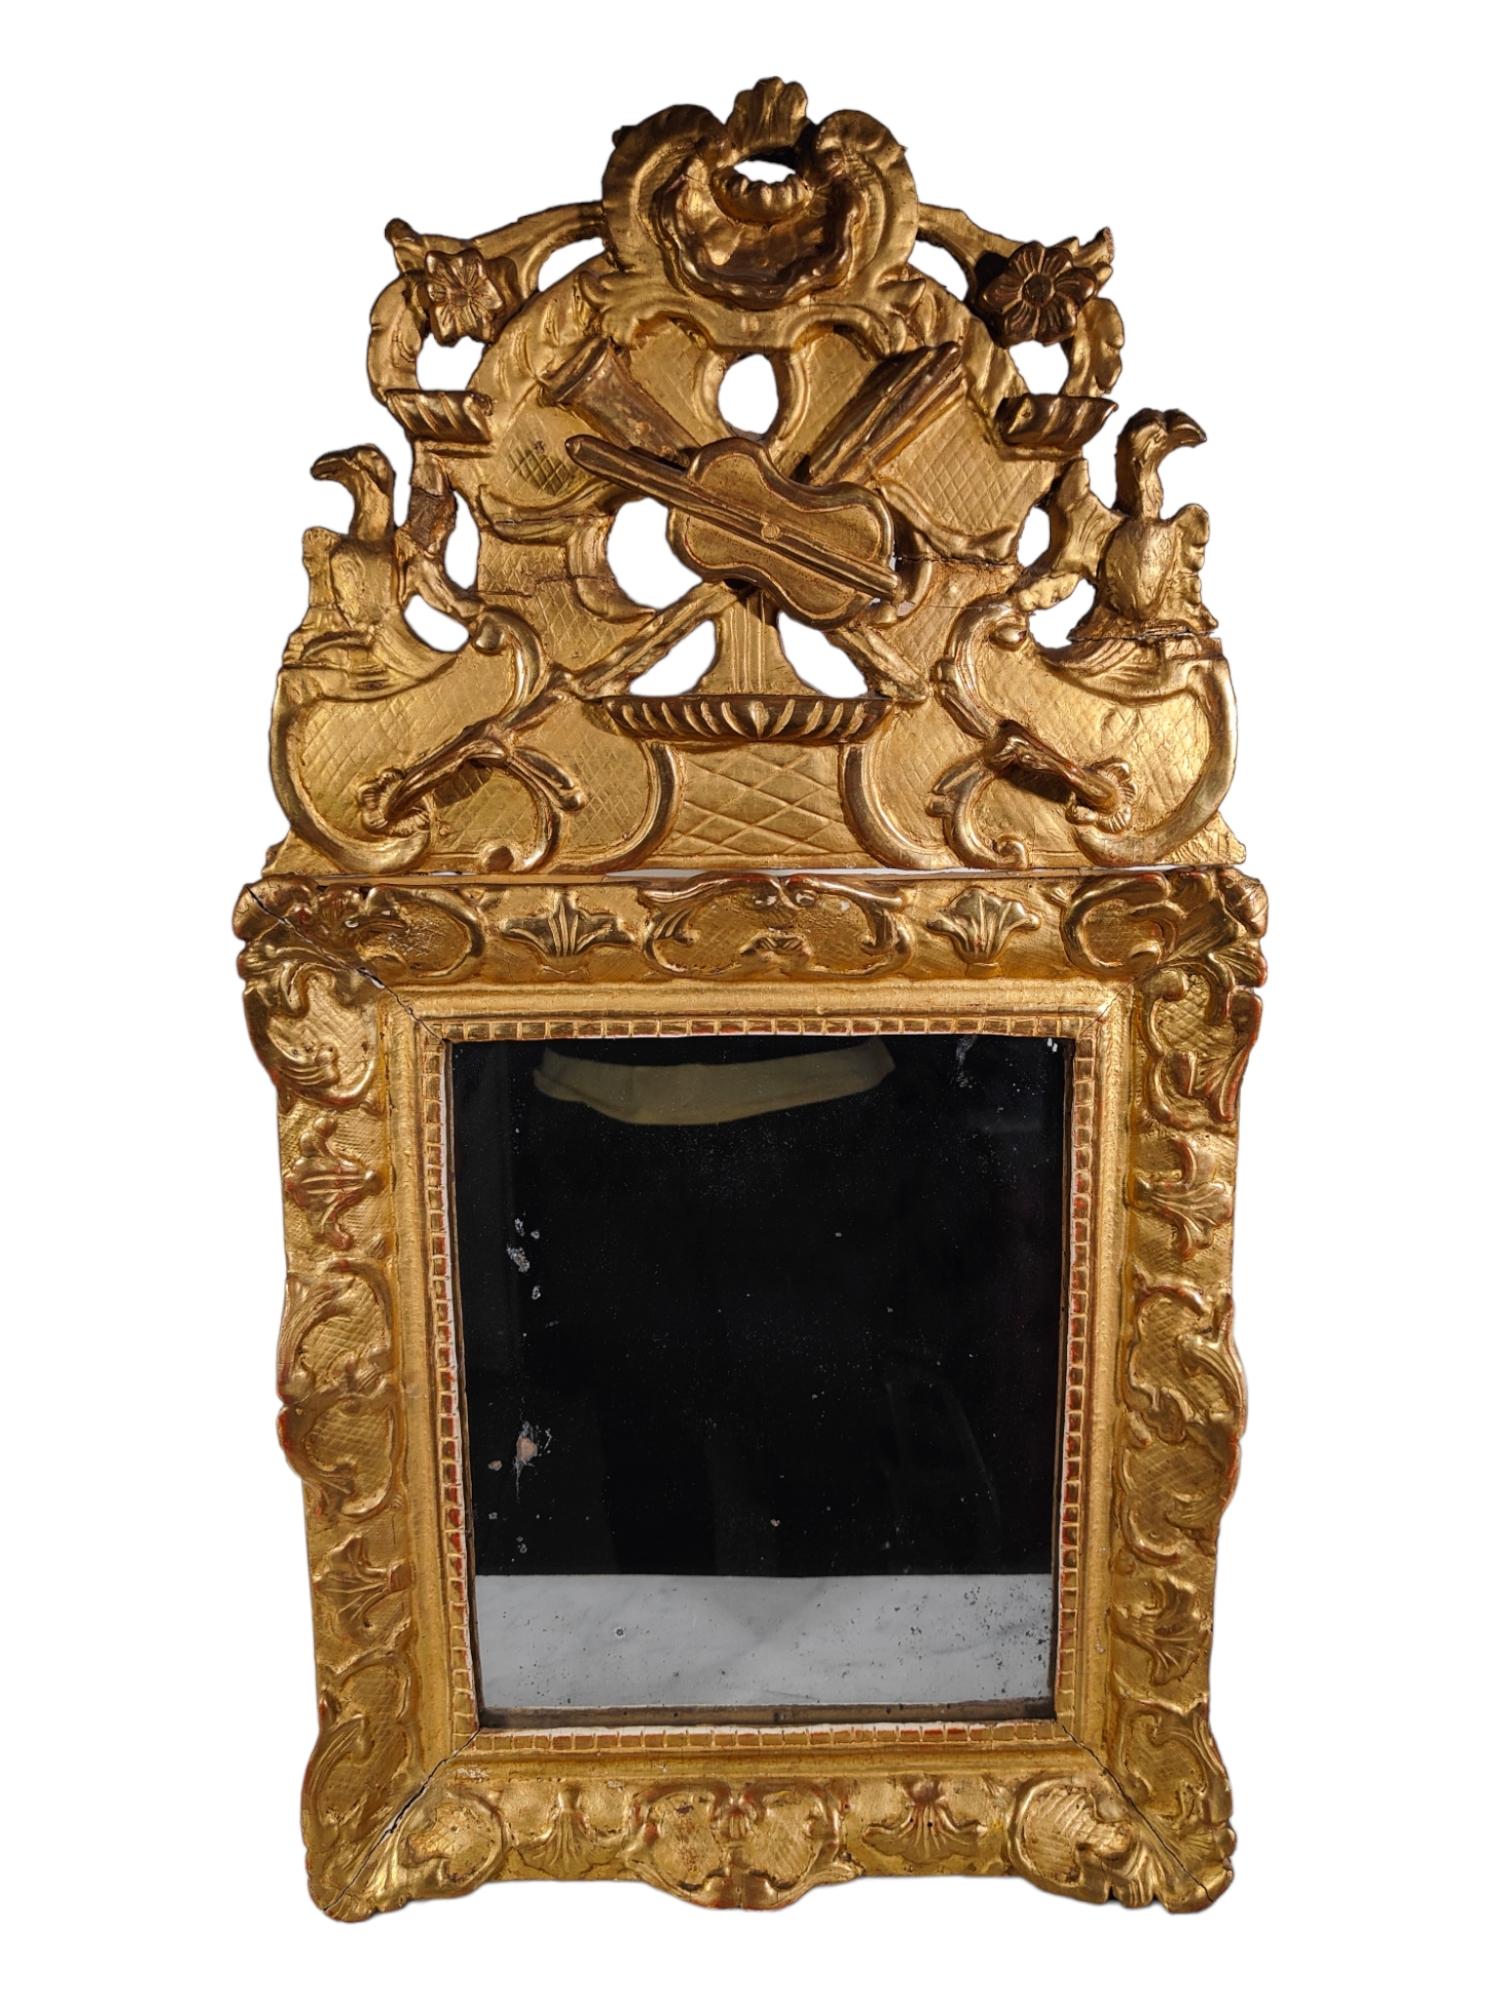 Louis XVI mirror and gilt wood.
France, end of XVIII CENTURY. Good condition. Size:74x40 cm